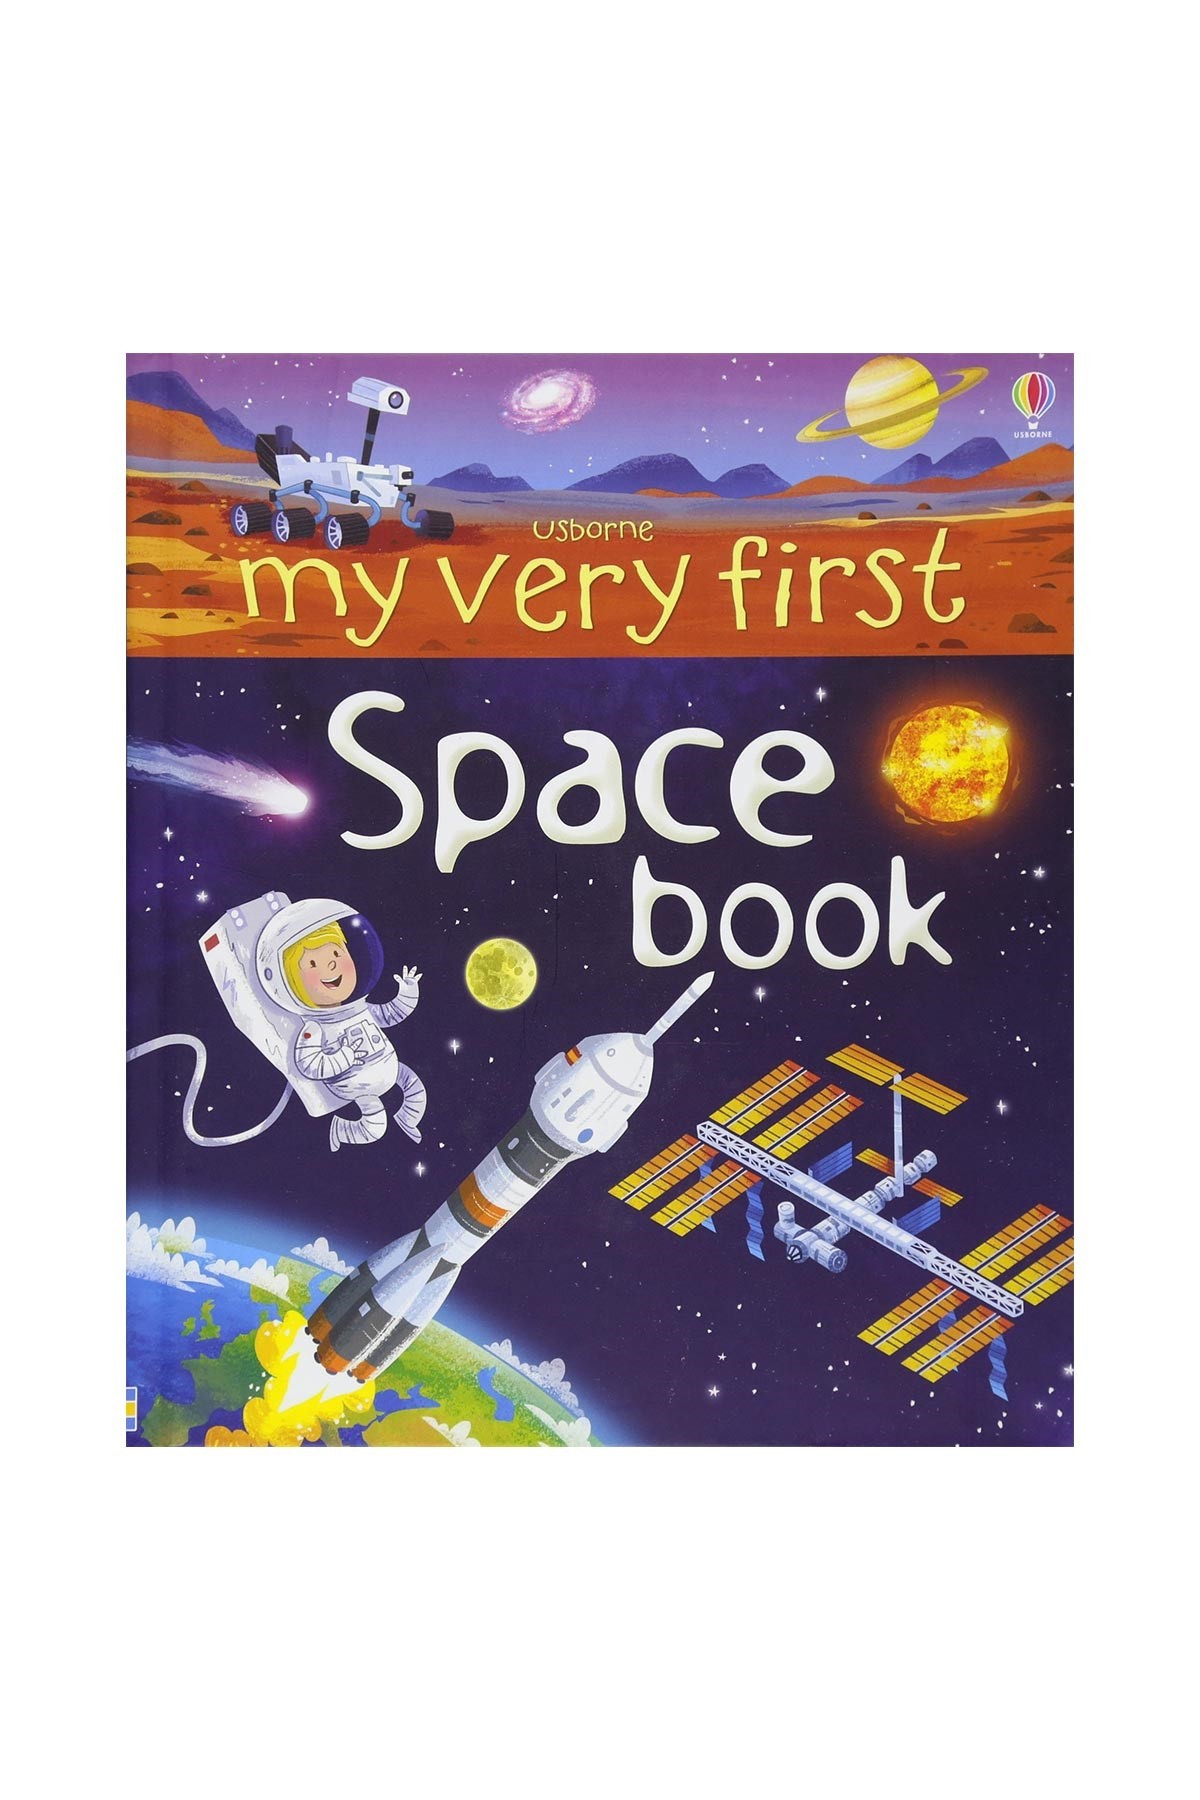 The Usborne My Very First Space Book